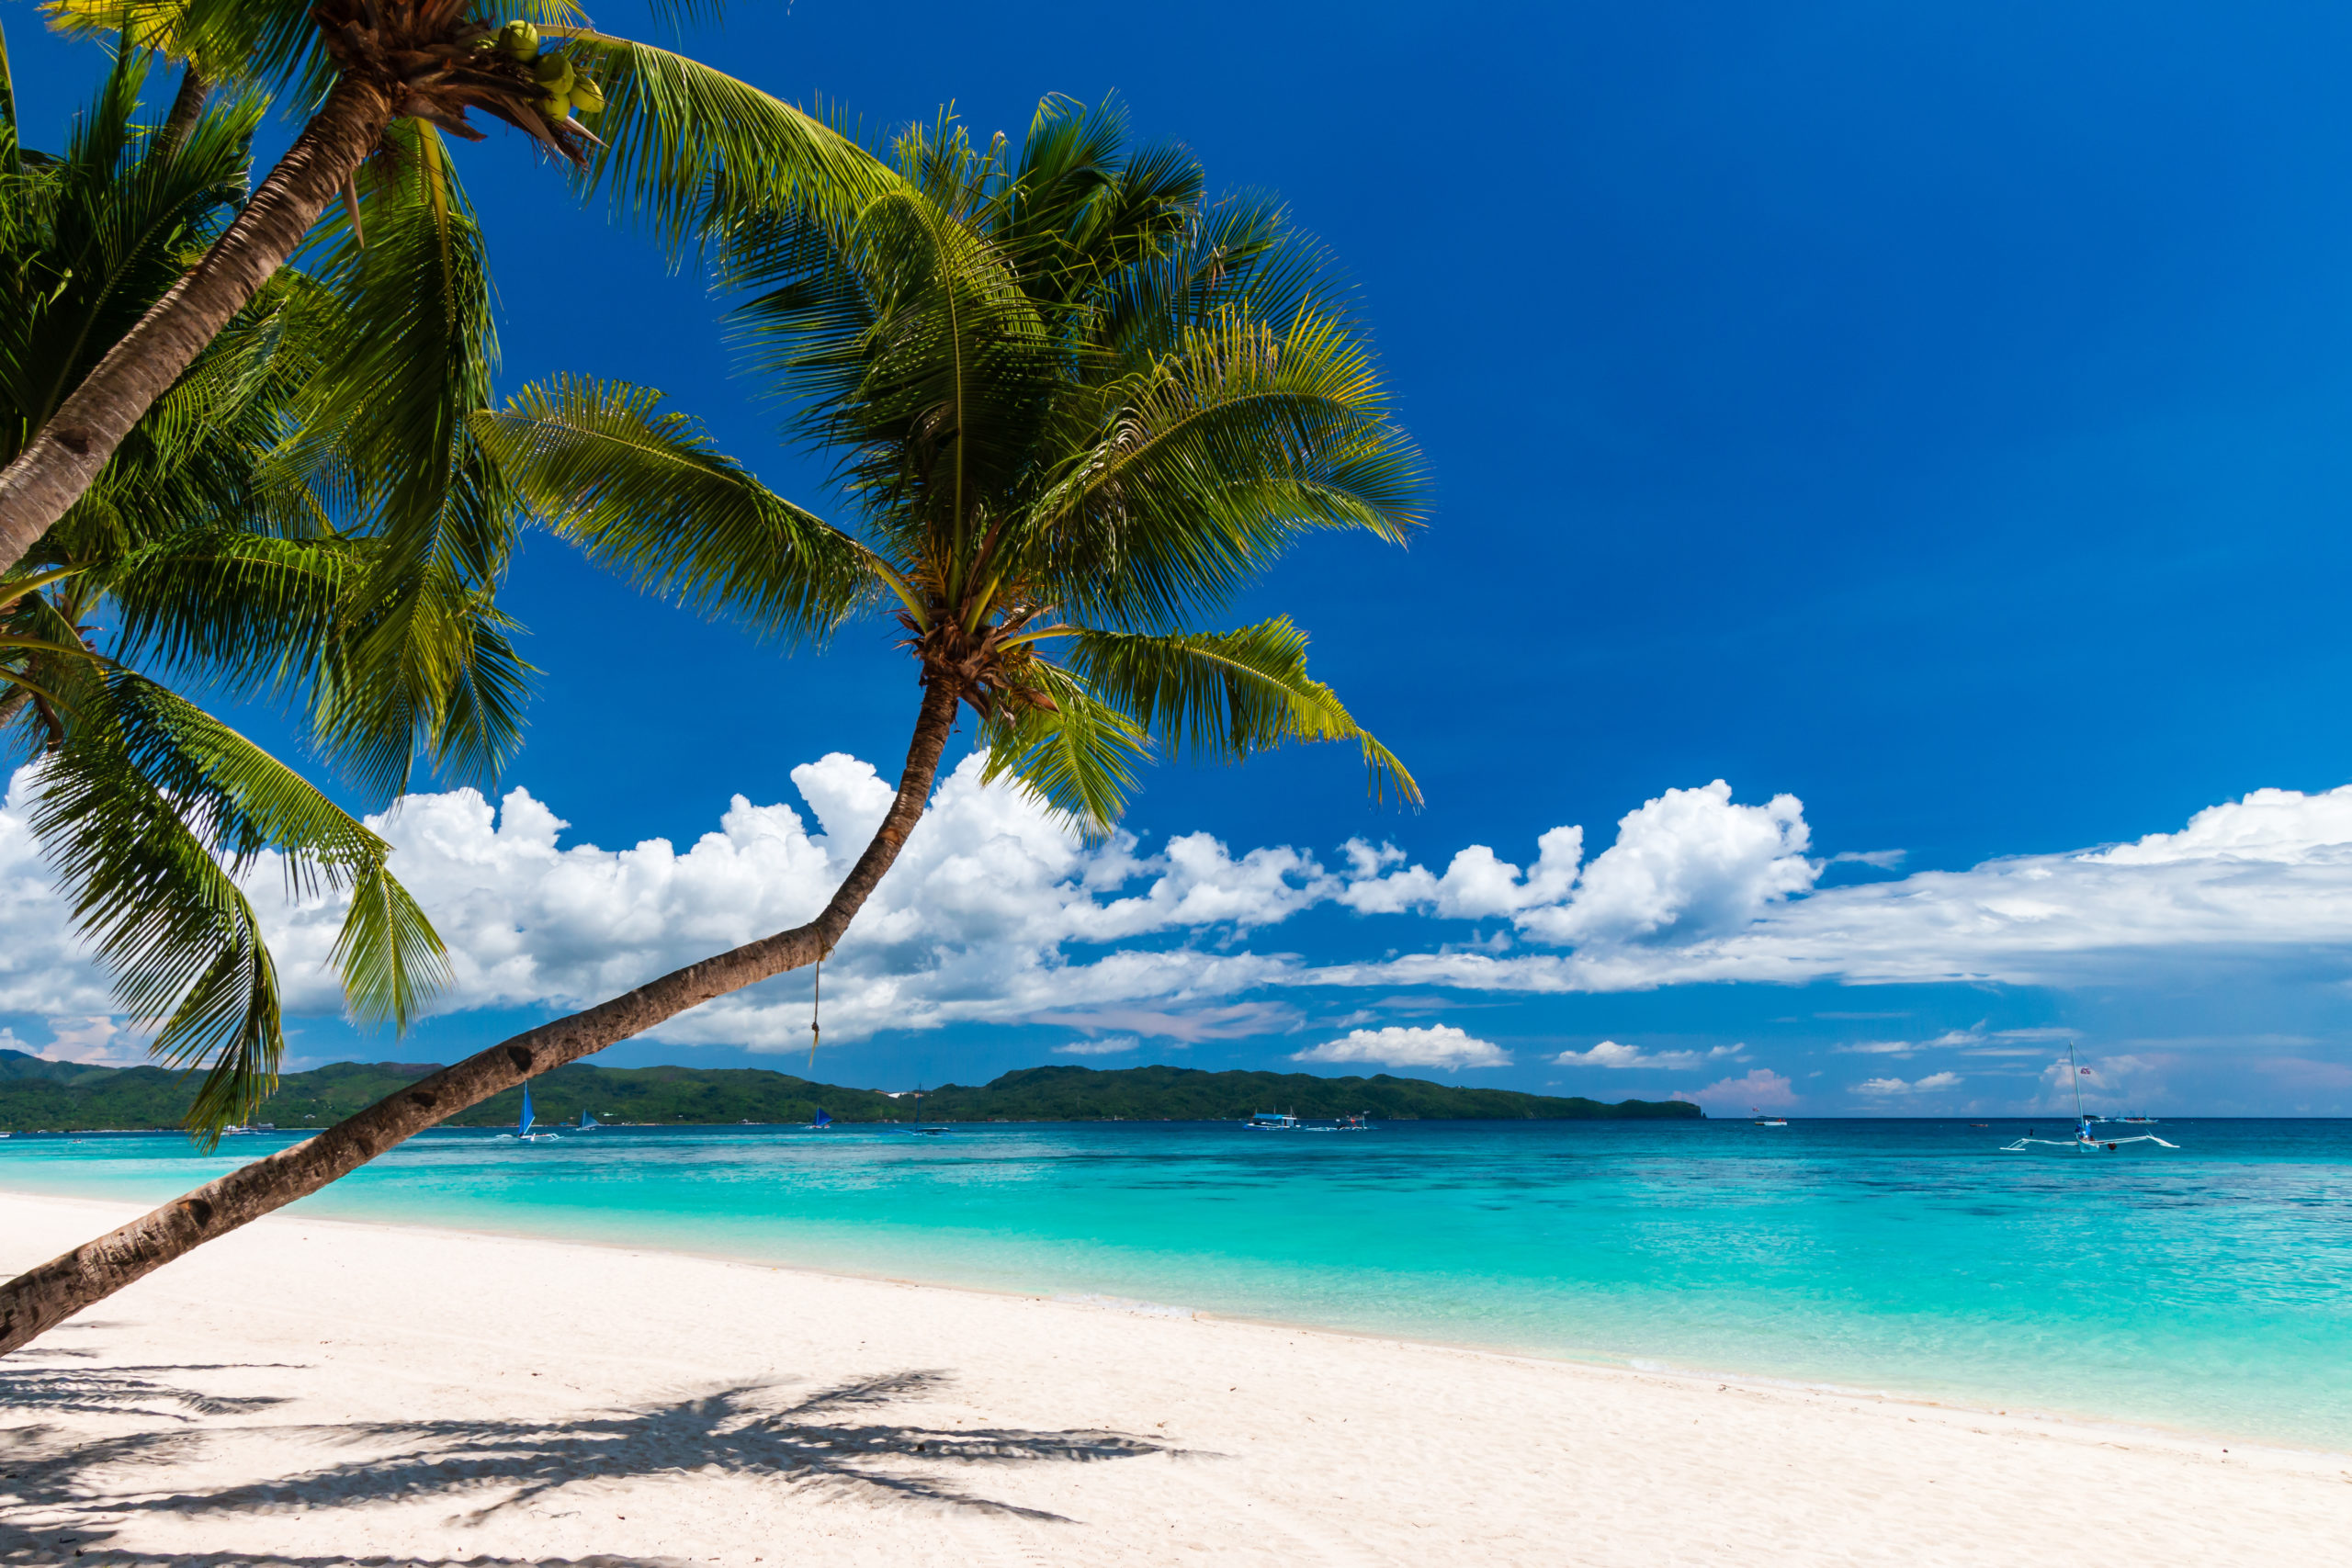 A beautiful tropical beach with palm trees and shallow waters